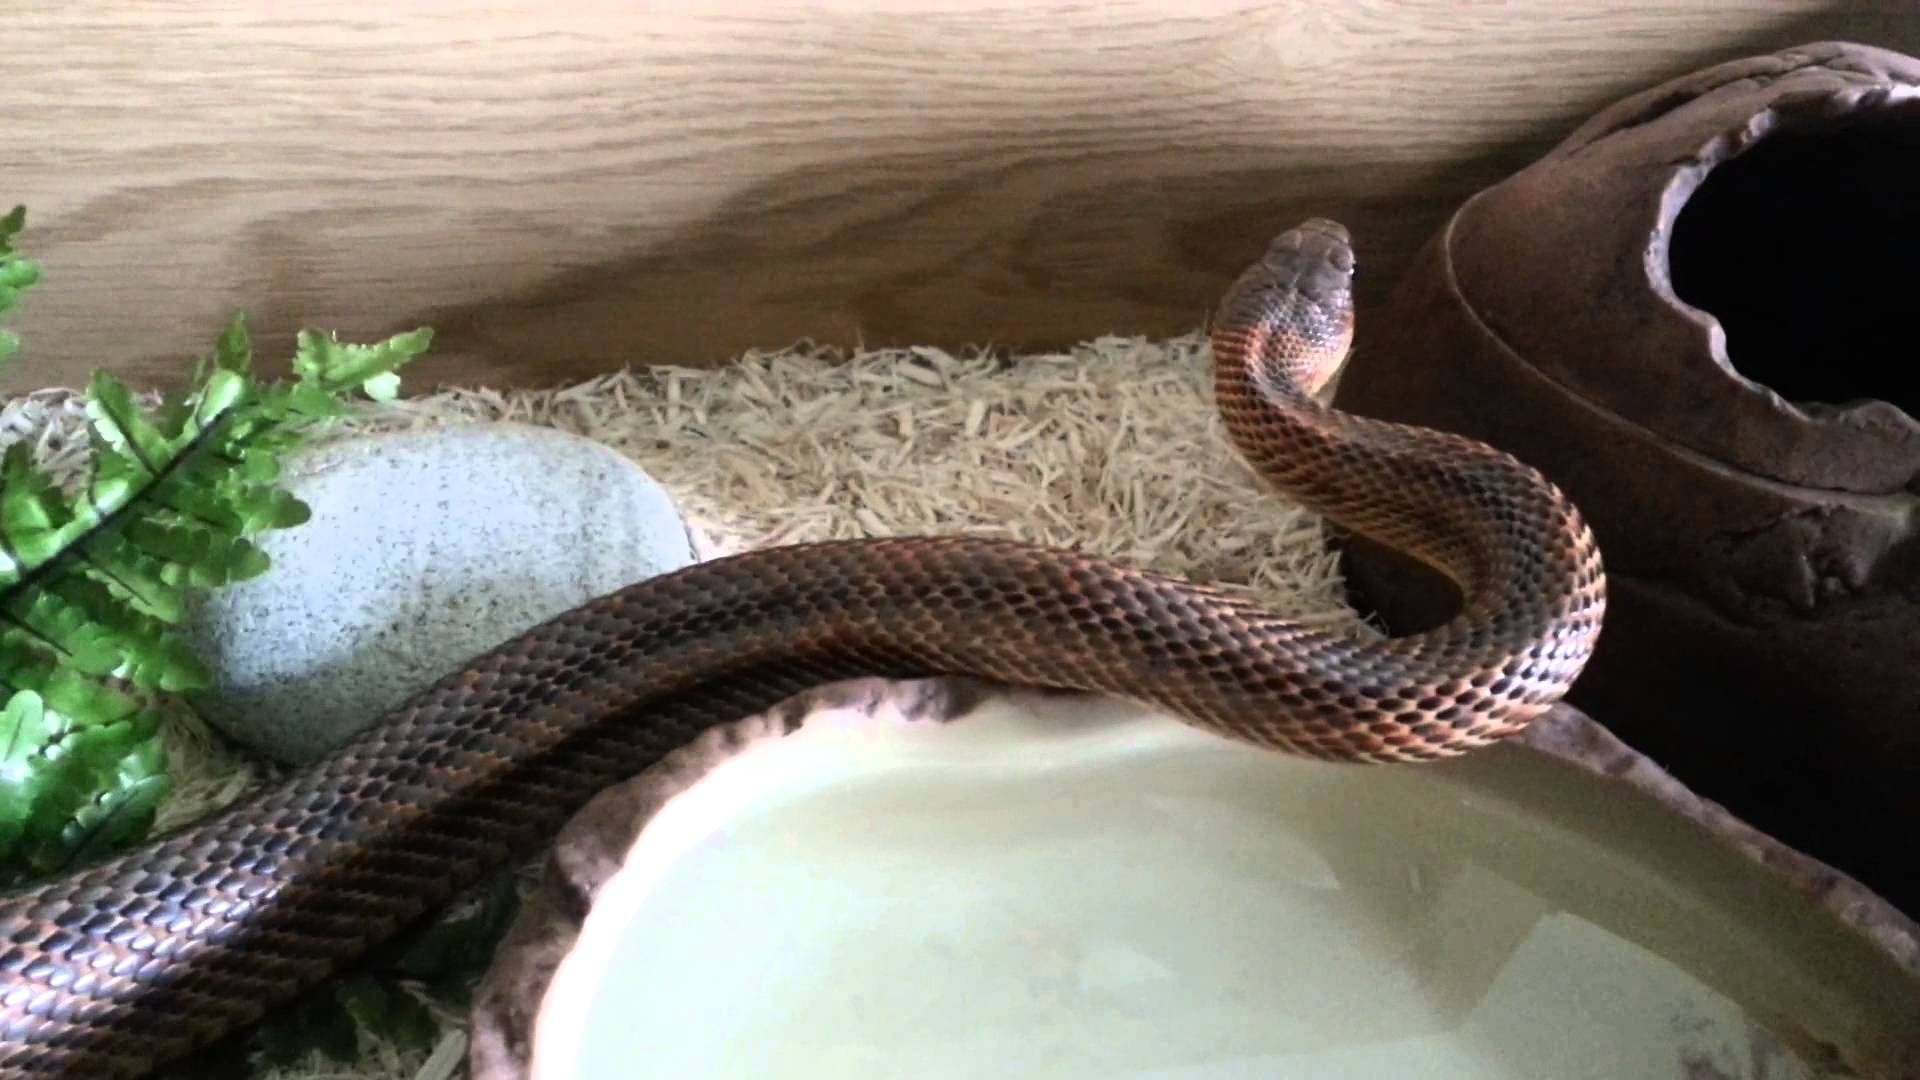 Baird's Rat Snake Facts and Pictures1920 x 1080